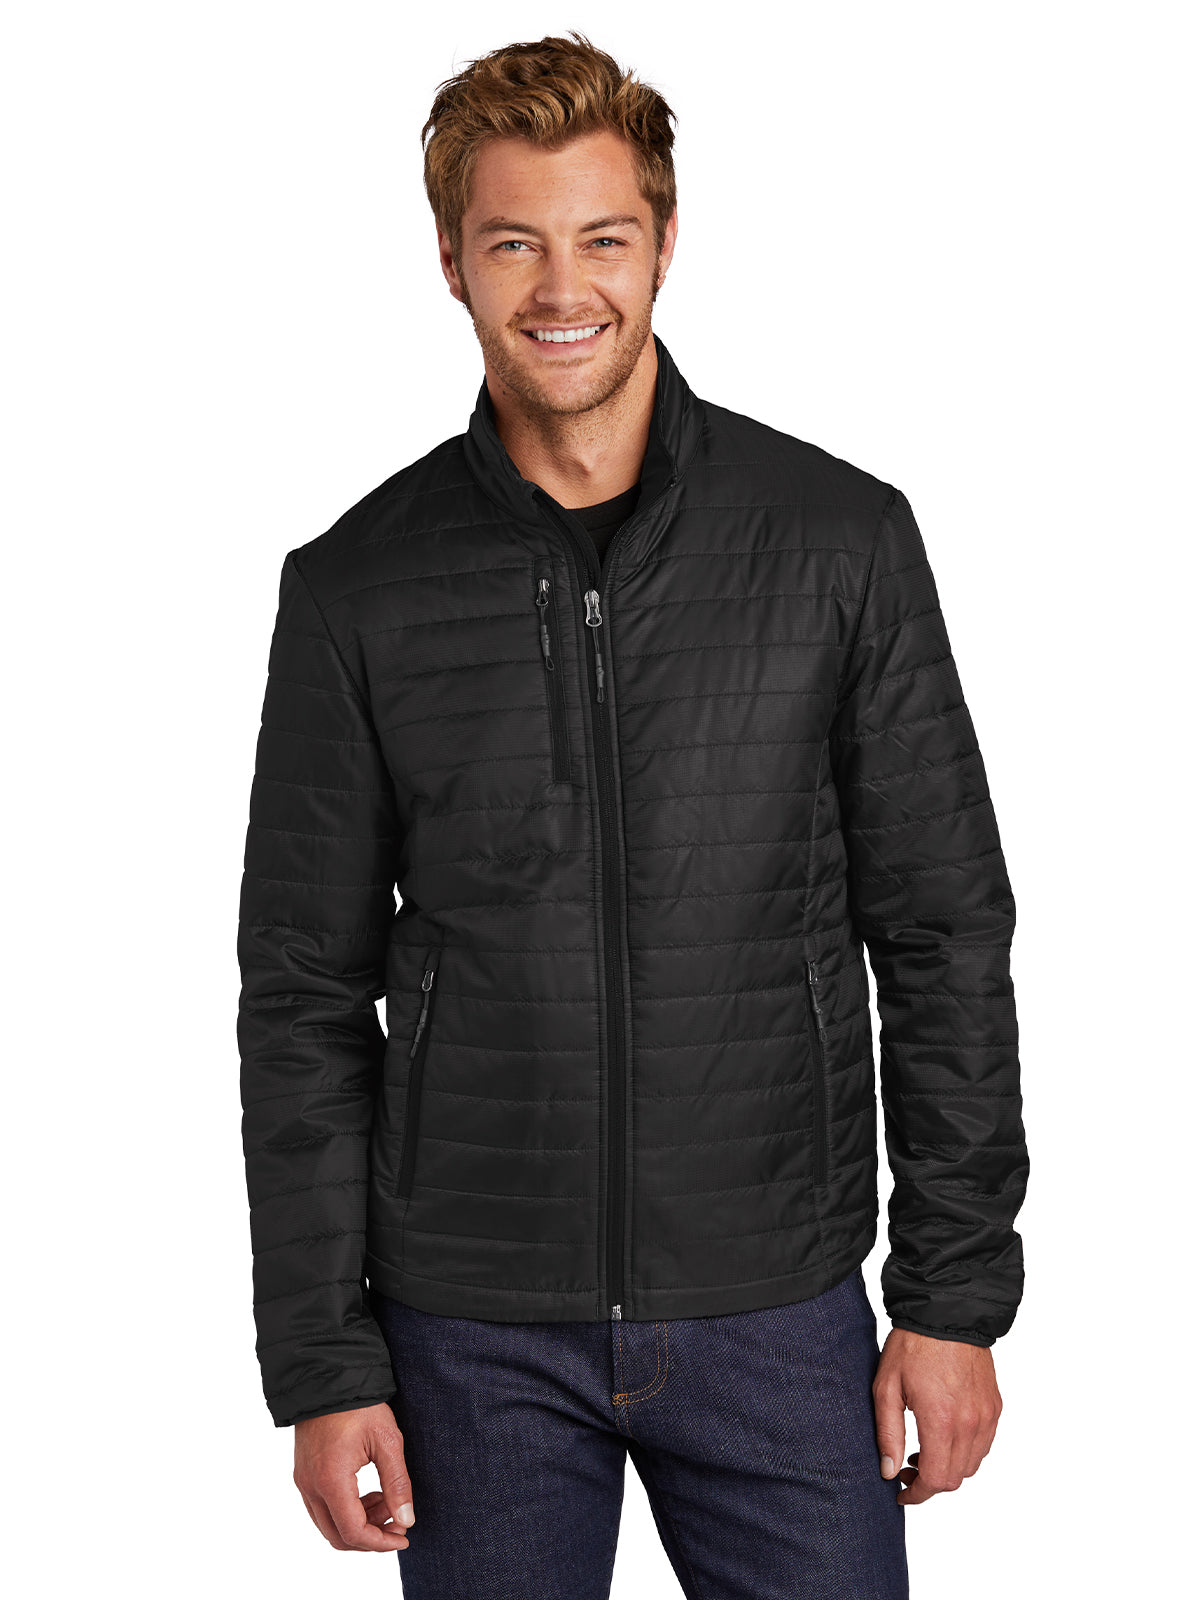 Men's Packable Puffy Jacket